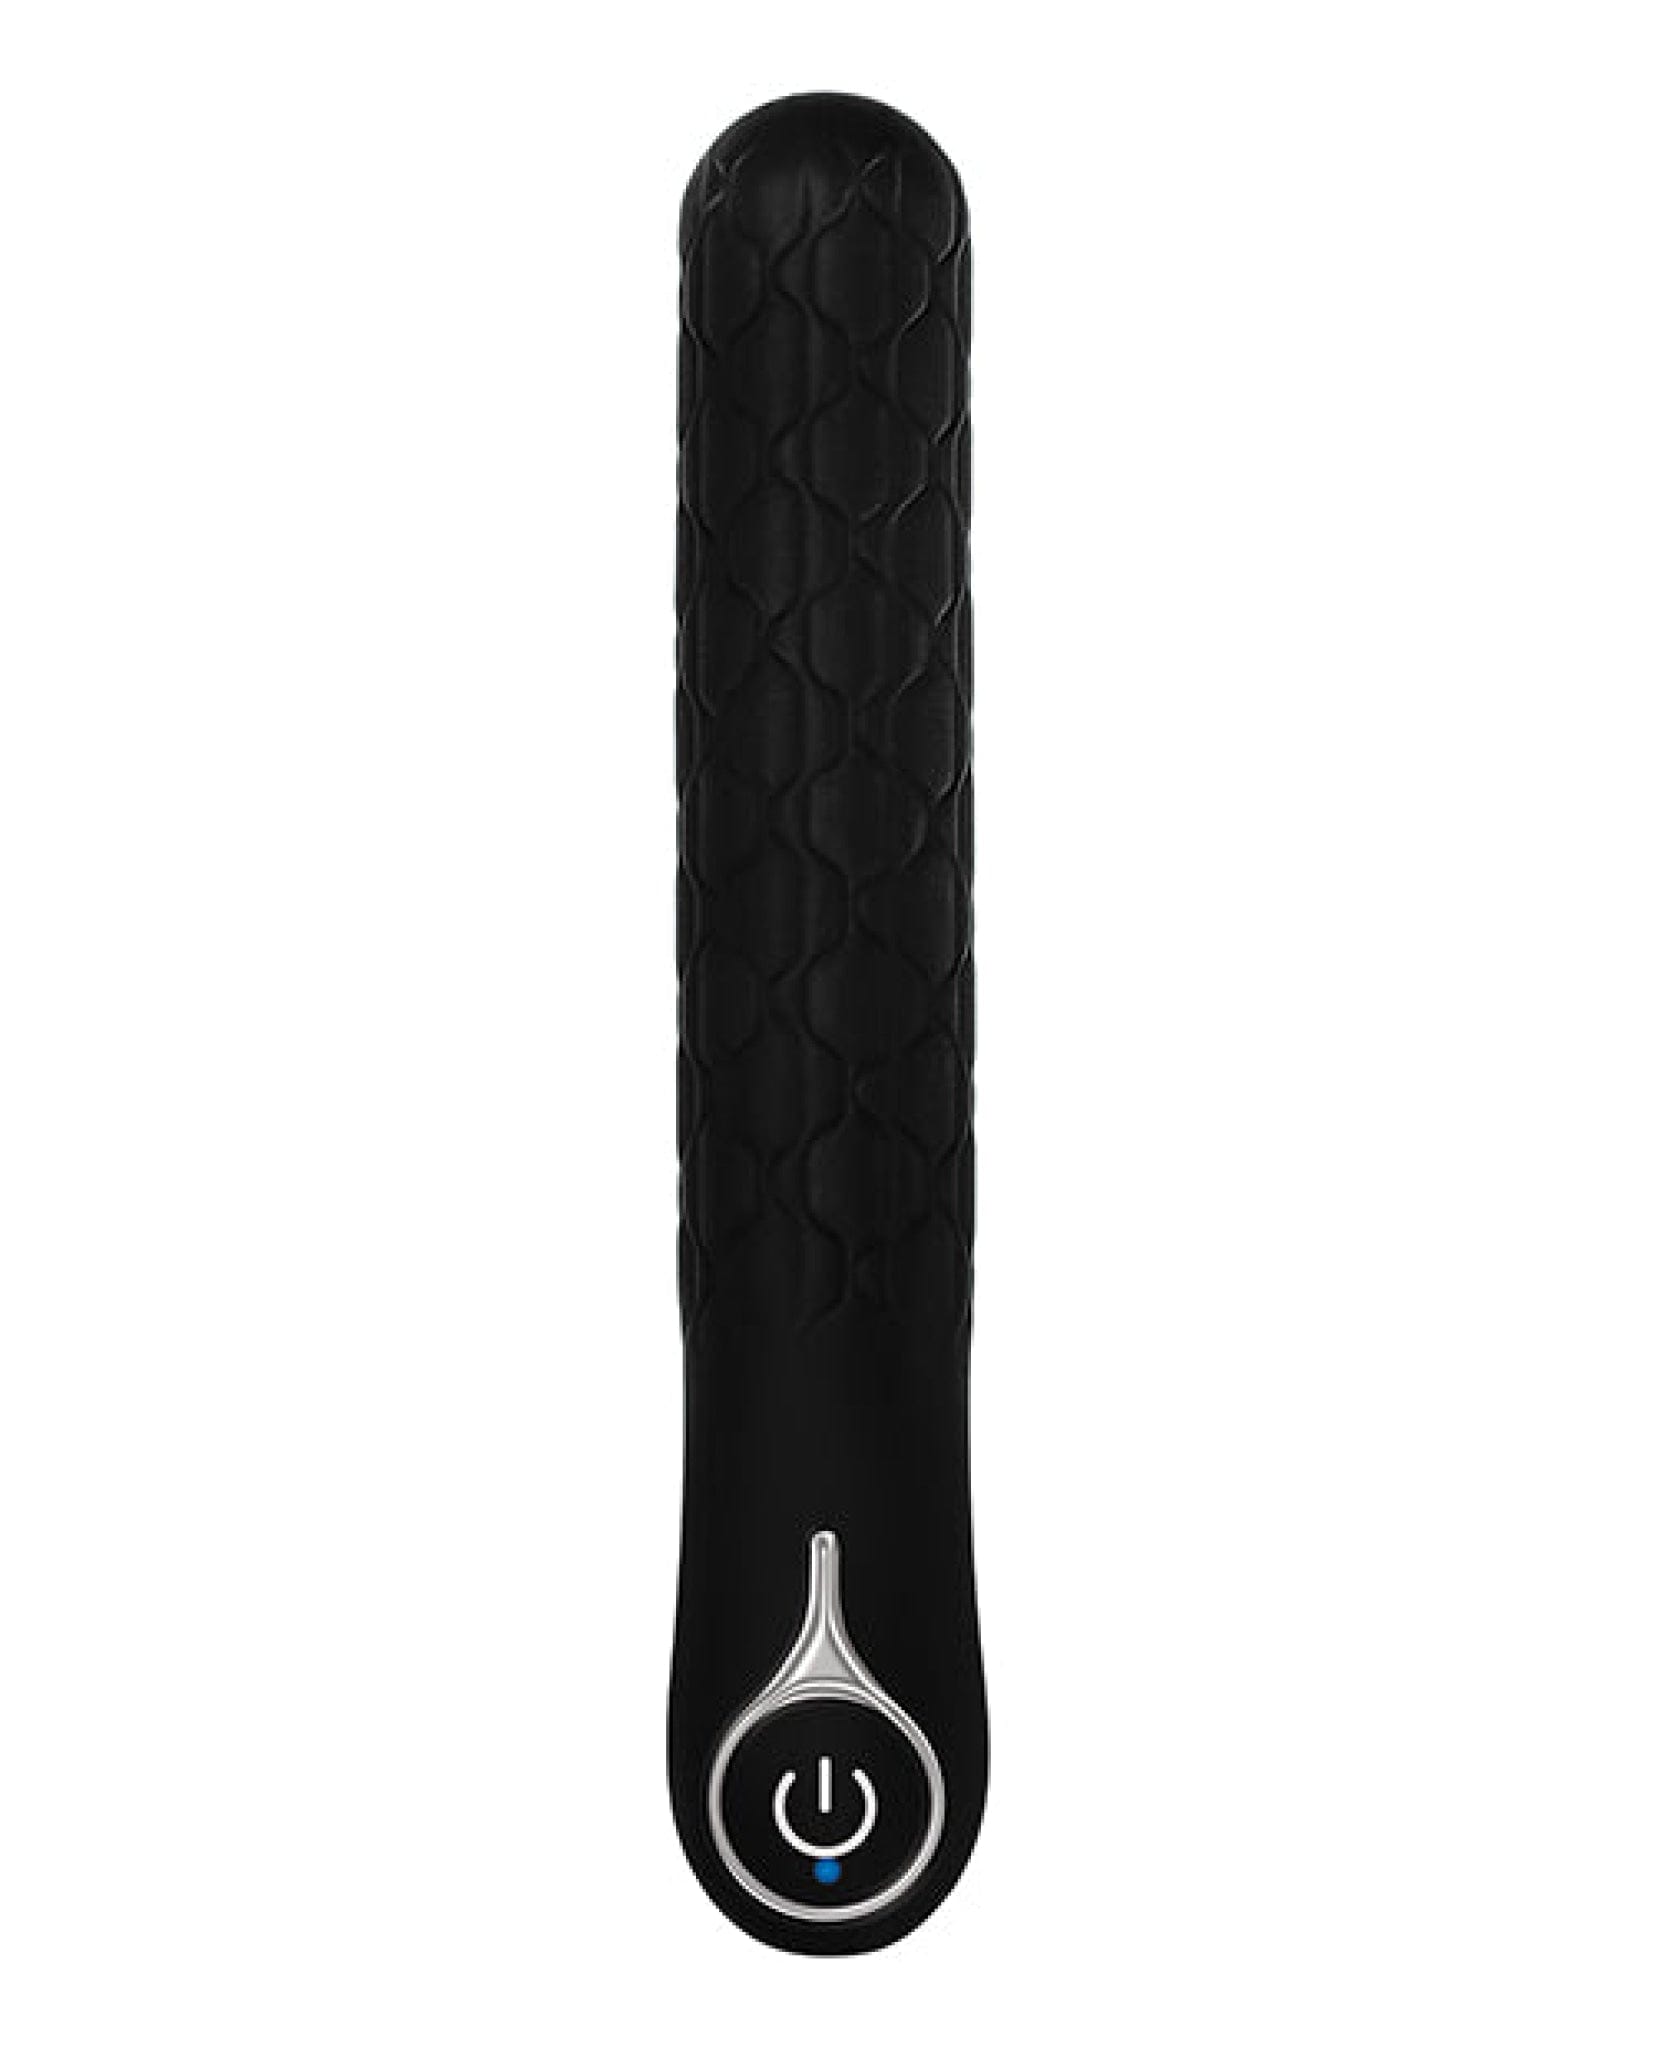 Doll Authority Vibrators Evolved Quilted Love Rechargeable Vibrator - Black